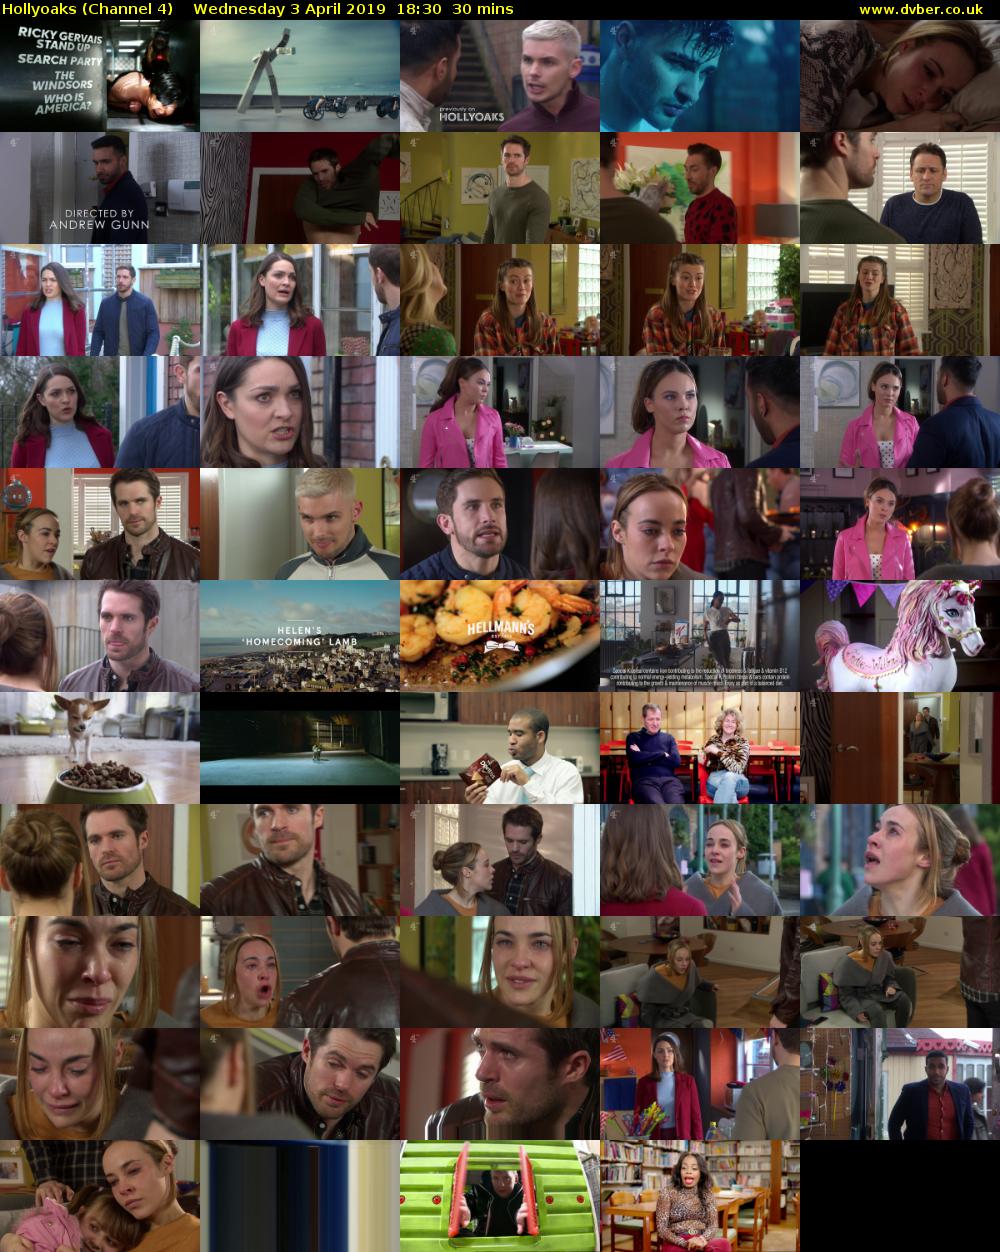 Hollyoaks (Channel 4) Wednesday 3 April 2019 18:30 - 19:00